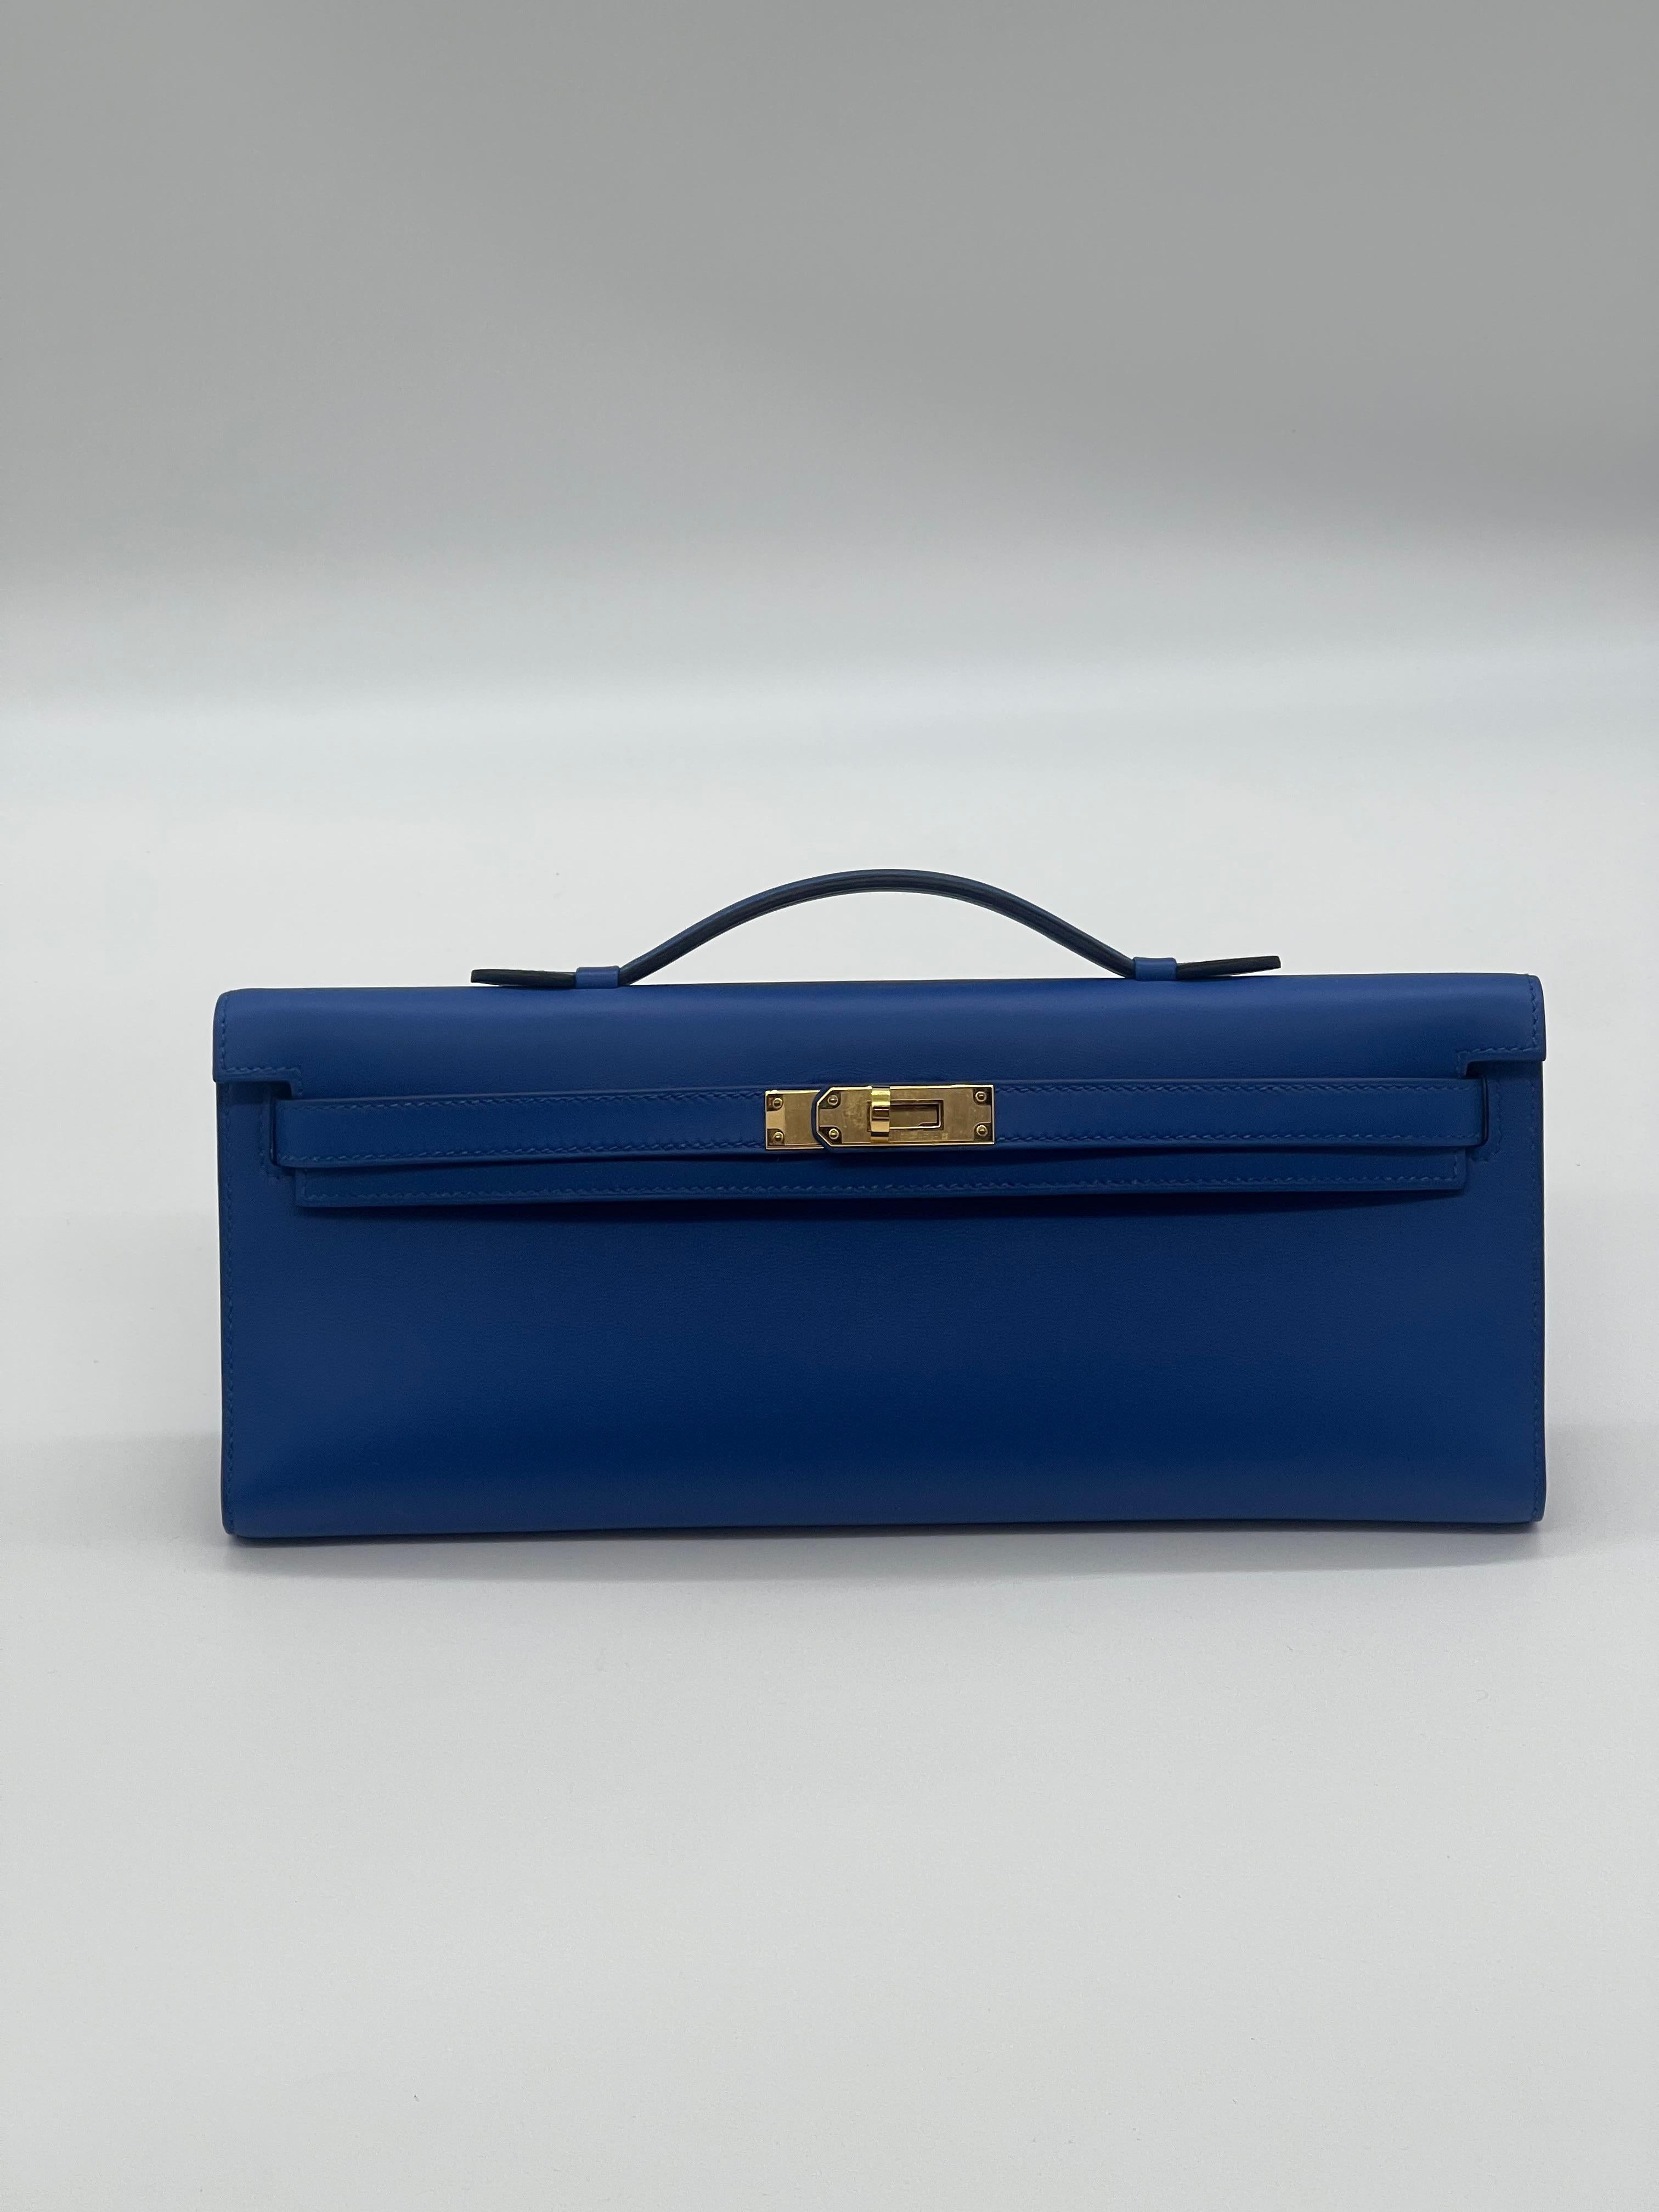 Hermes Kelly Cut Clutch Swift Calfskin Bleu France, Gold Hardware

Condition: Brand New
Measurements: (W)12.25 x (H)5 x (D)1 inches
Material: Calfskin Leather
Hardware: Gold plated
 
Comes in full original packaging.
Included original Hermes rain